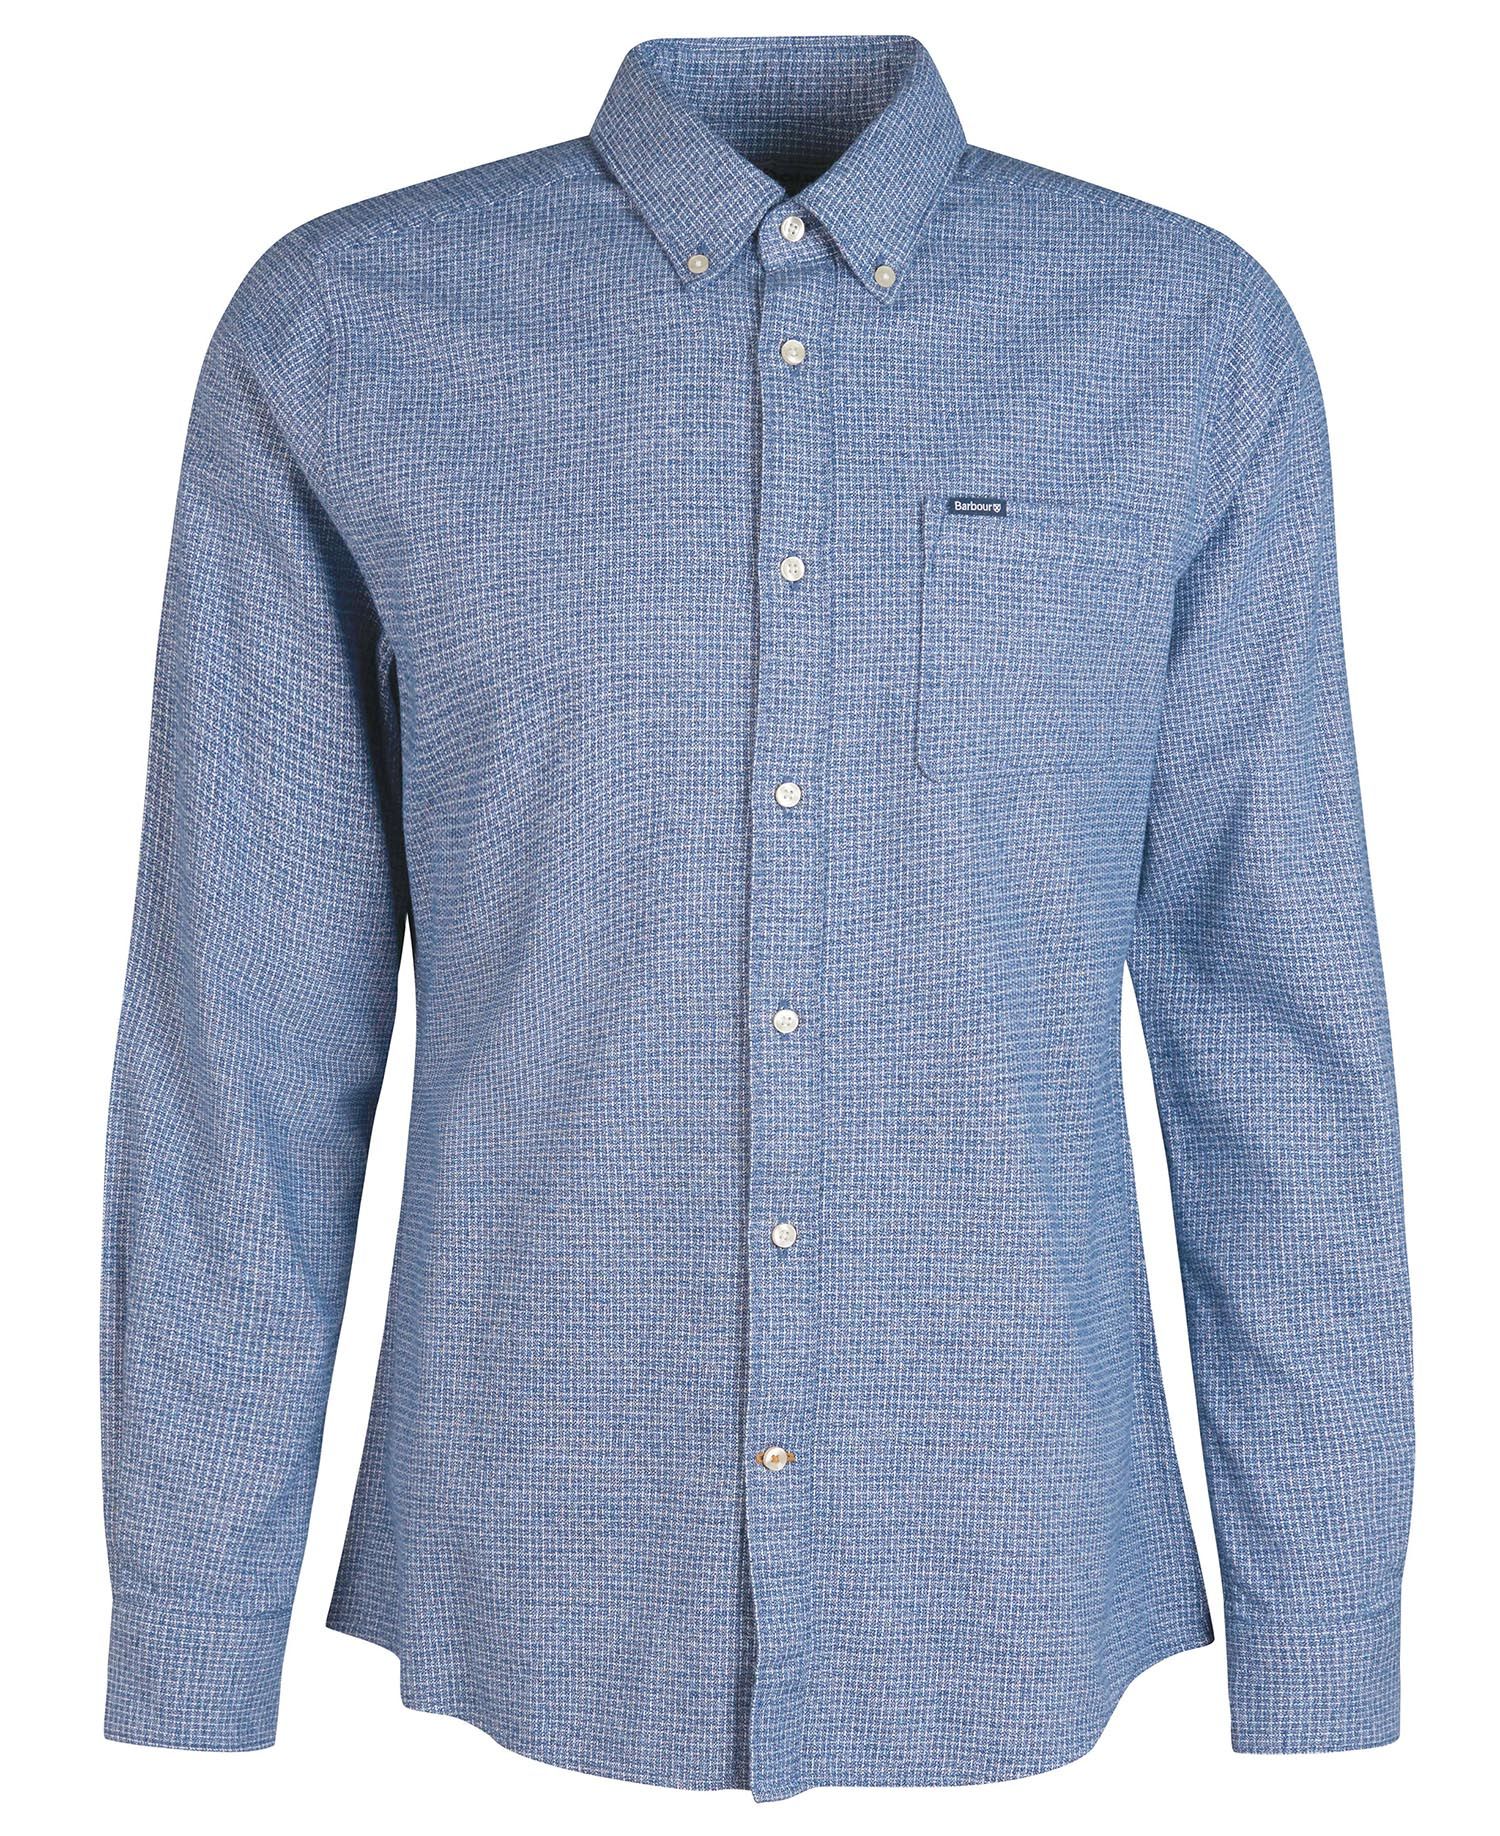 Barbour Robfell Tailored Shirt